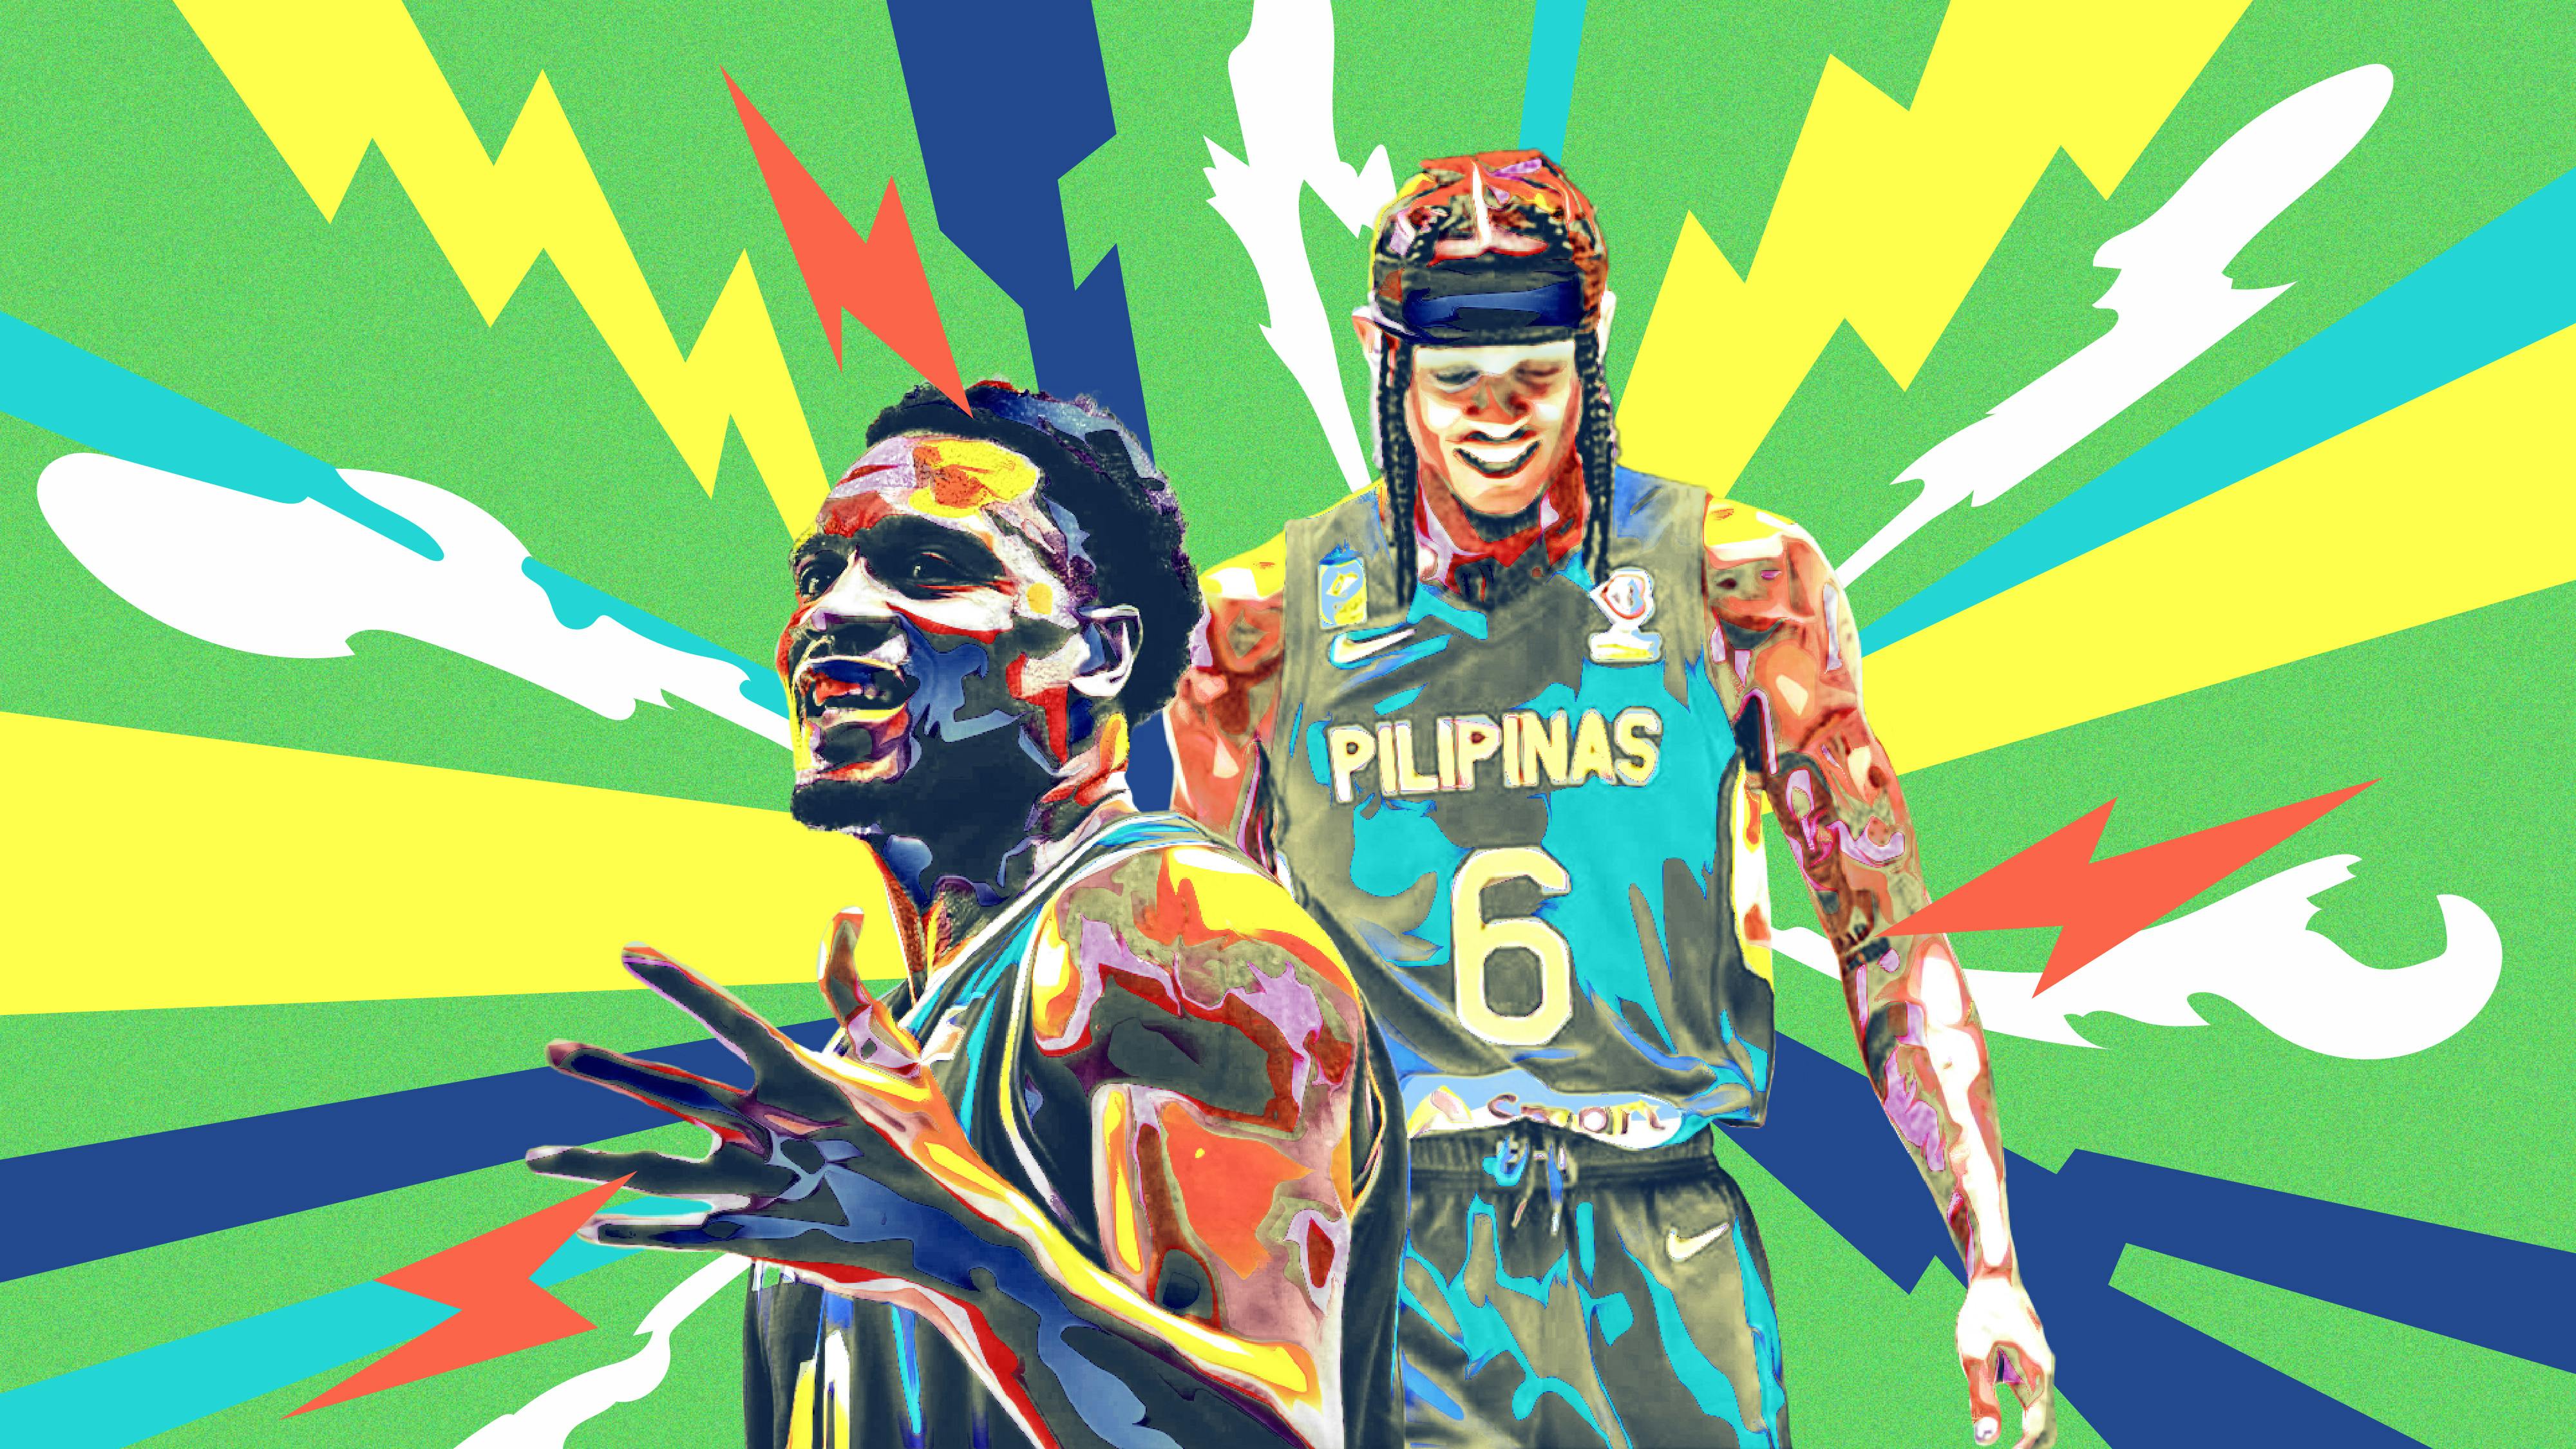 Absolute fire moments of Gilas Pilipinas from FIBA World Cup Asian Qualifiers